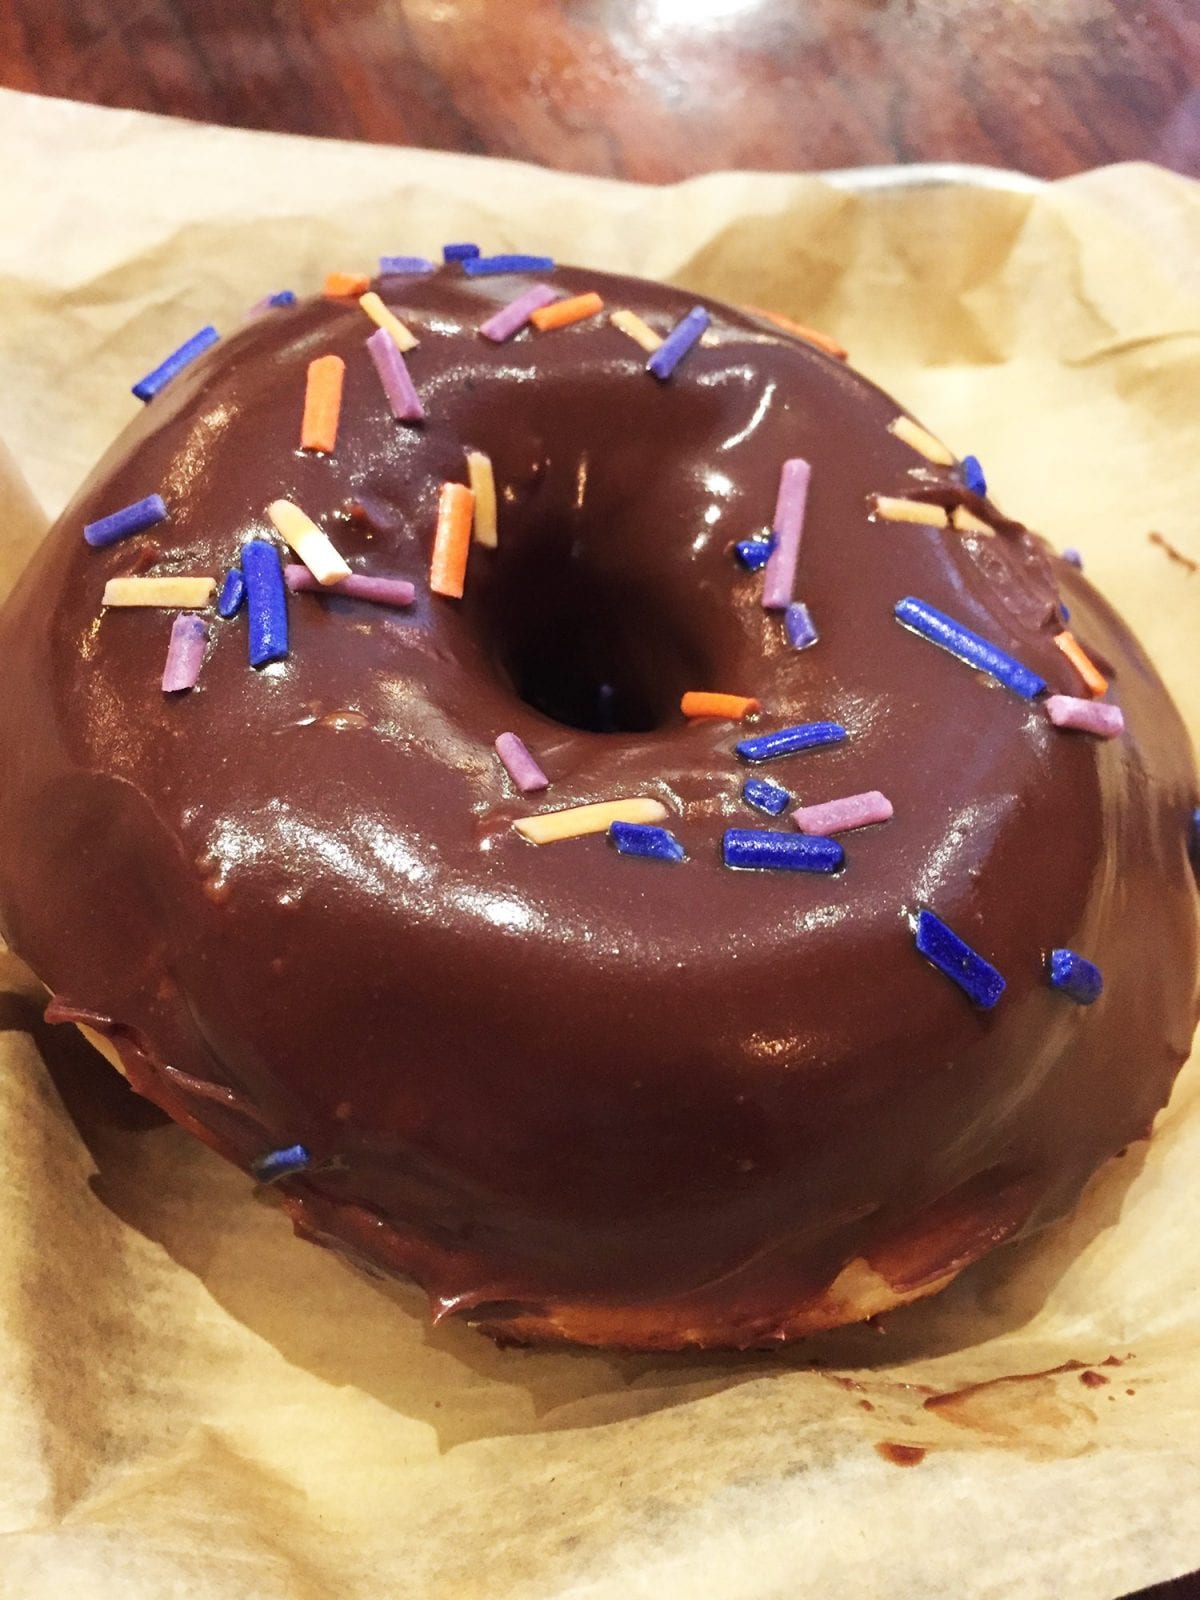 Places to eat in New Orleans - district doughnuts